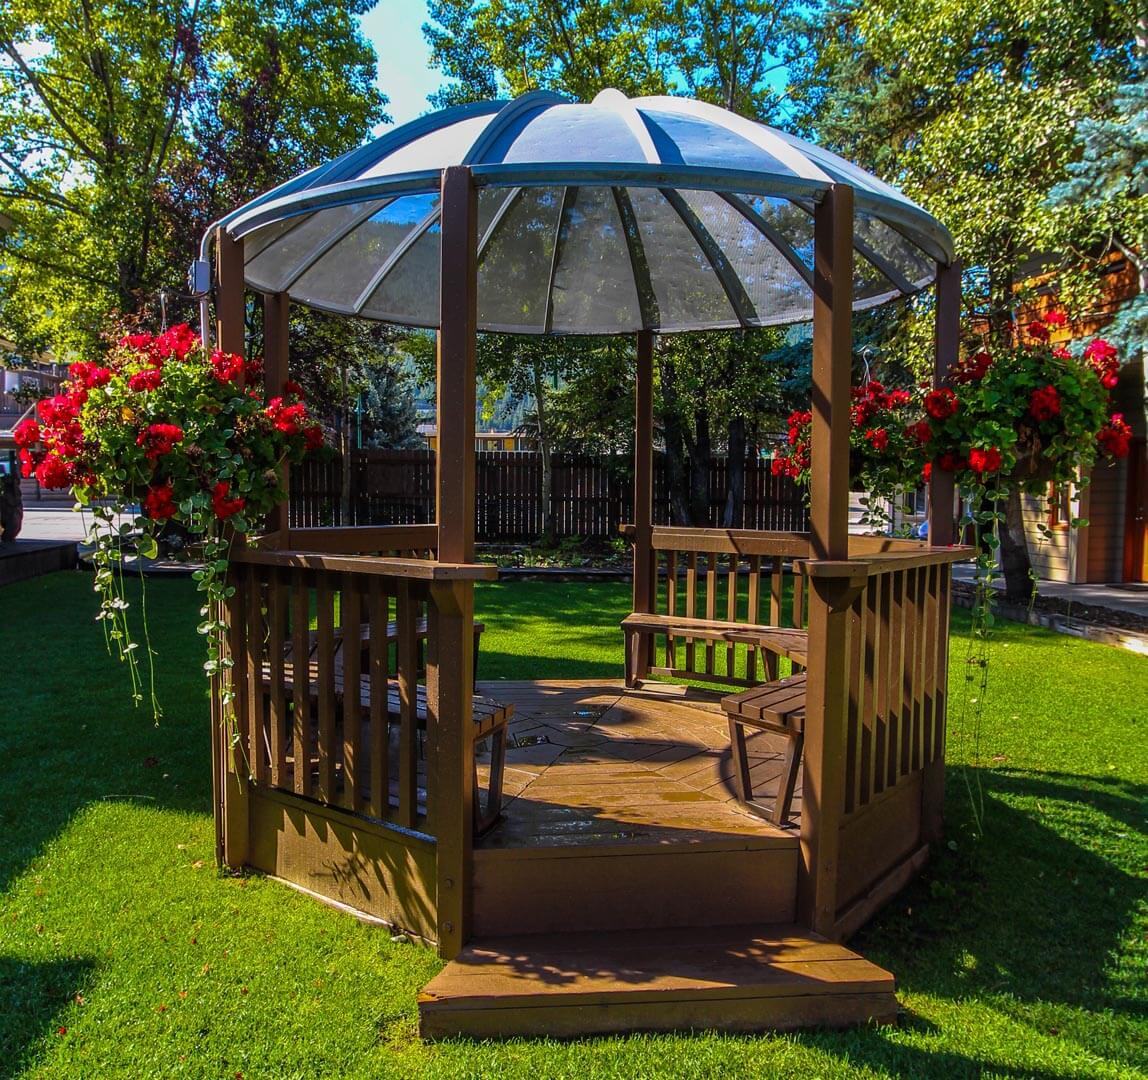 A relaxing outdoor Gazebo at VRI's Jackson Hole Towncenter in Wyoming.